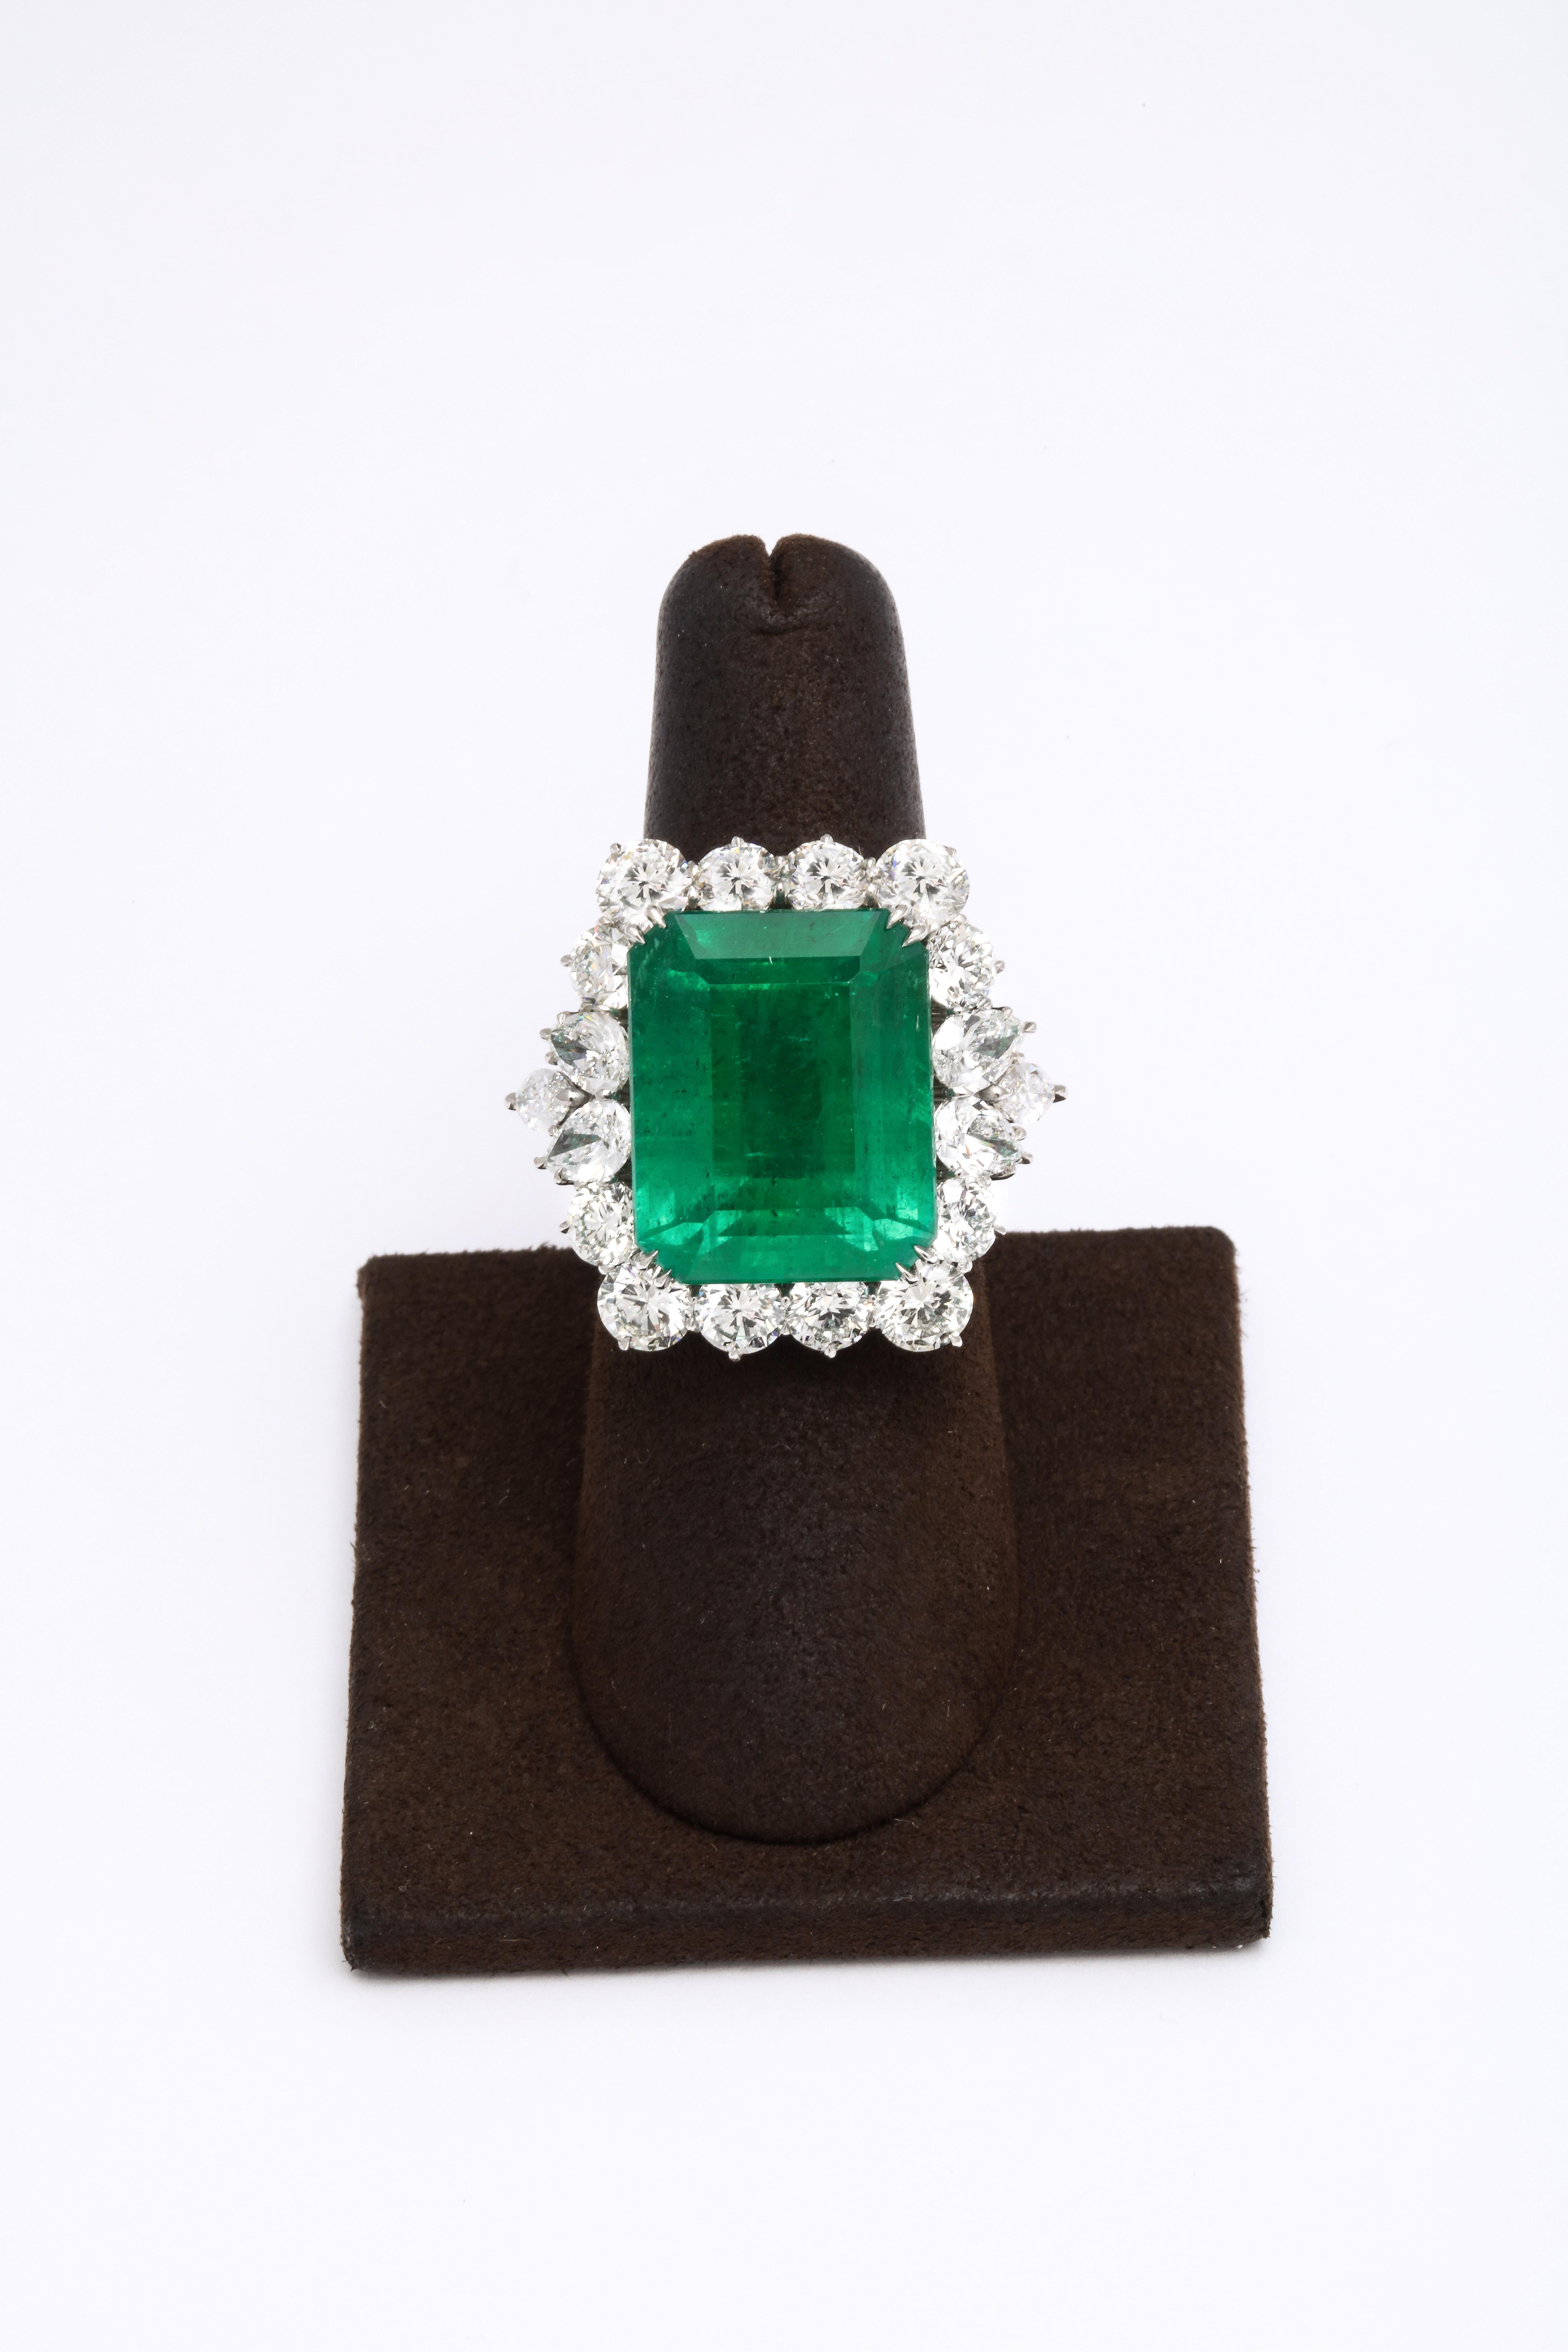 
A beautiful statement ring!

Featuring a fine 19.43 carat emerald surrounded by 6.13 carats of white round, pear and marquise shaped diamonds.

Set in a custom platinum mounting. 

Size 6.25, this ring can easily be resized.

Approximately .75